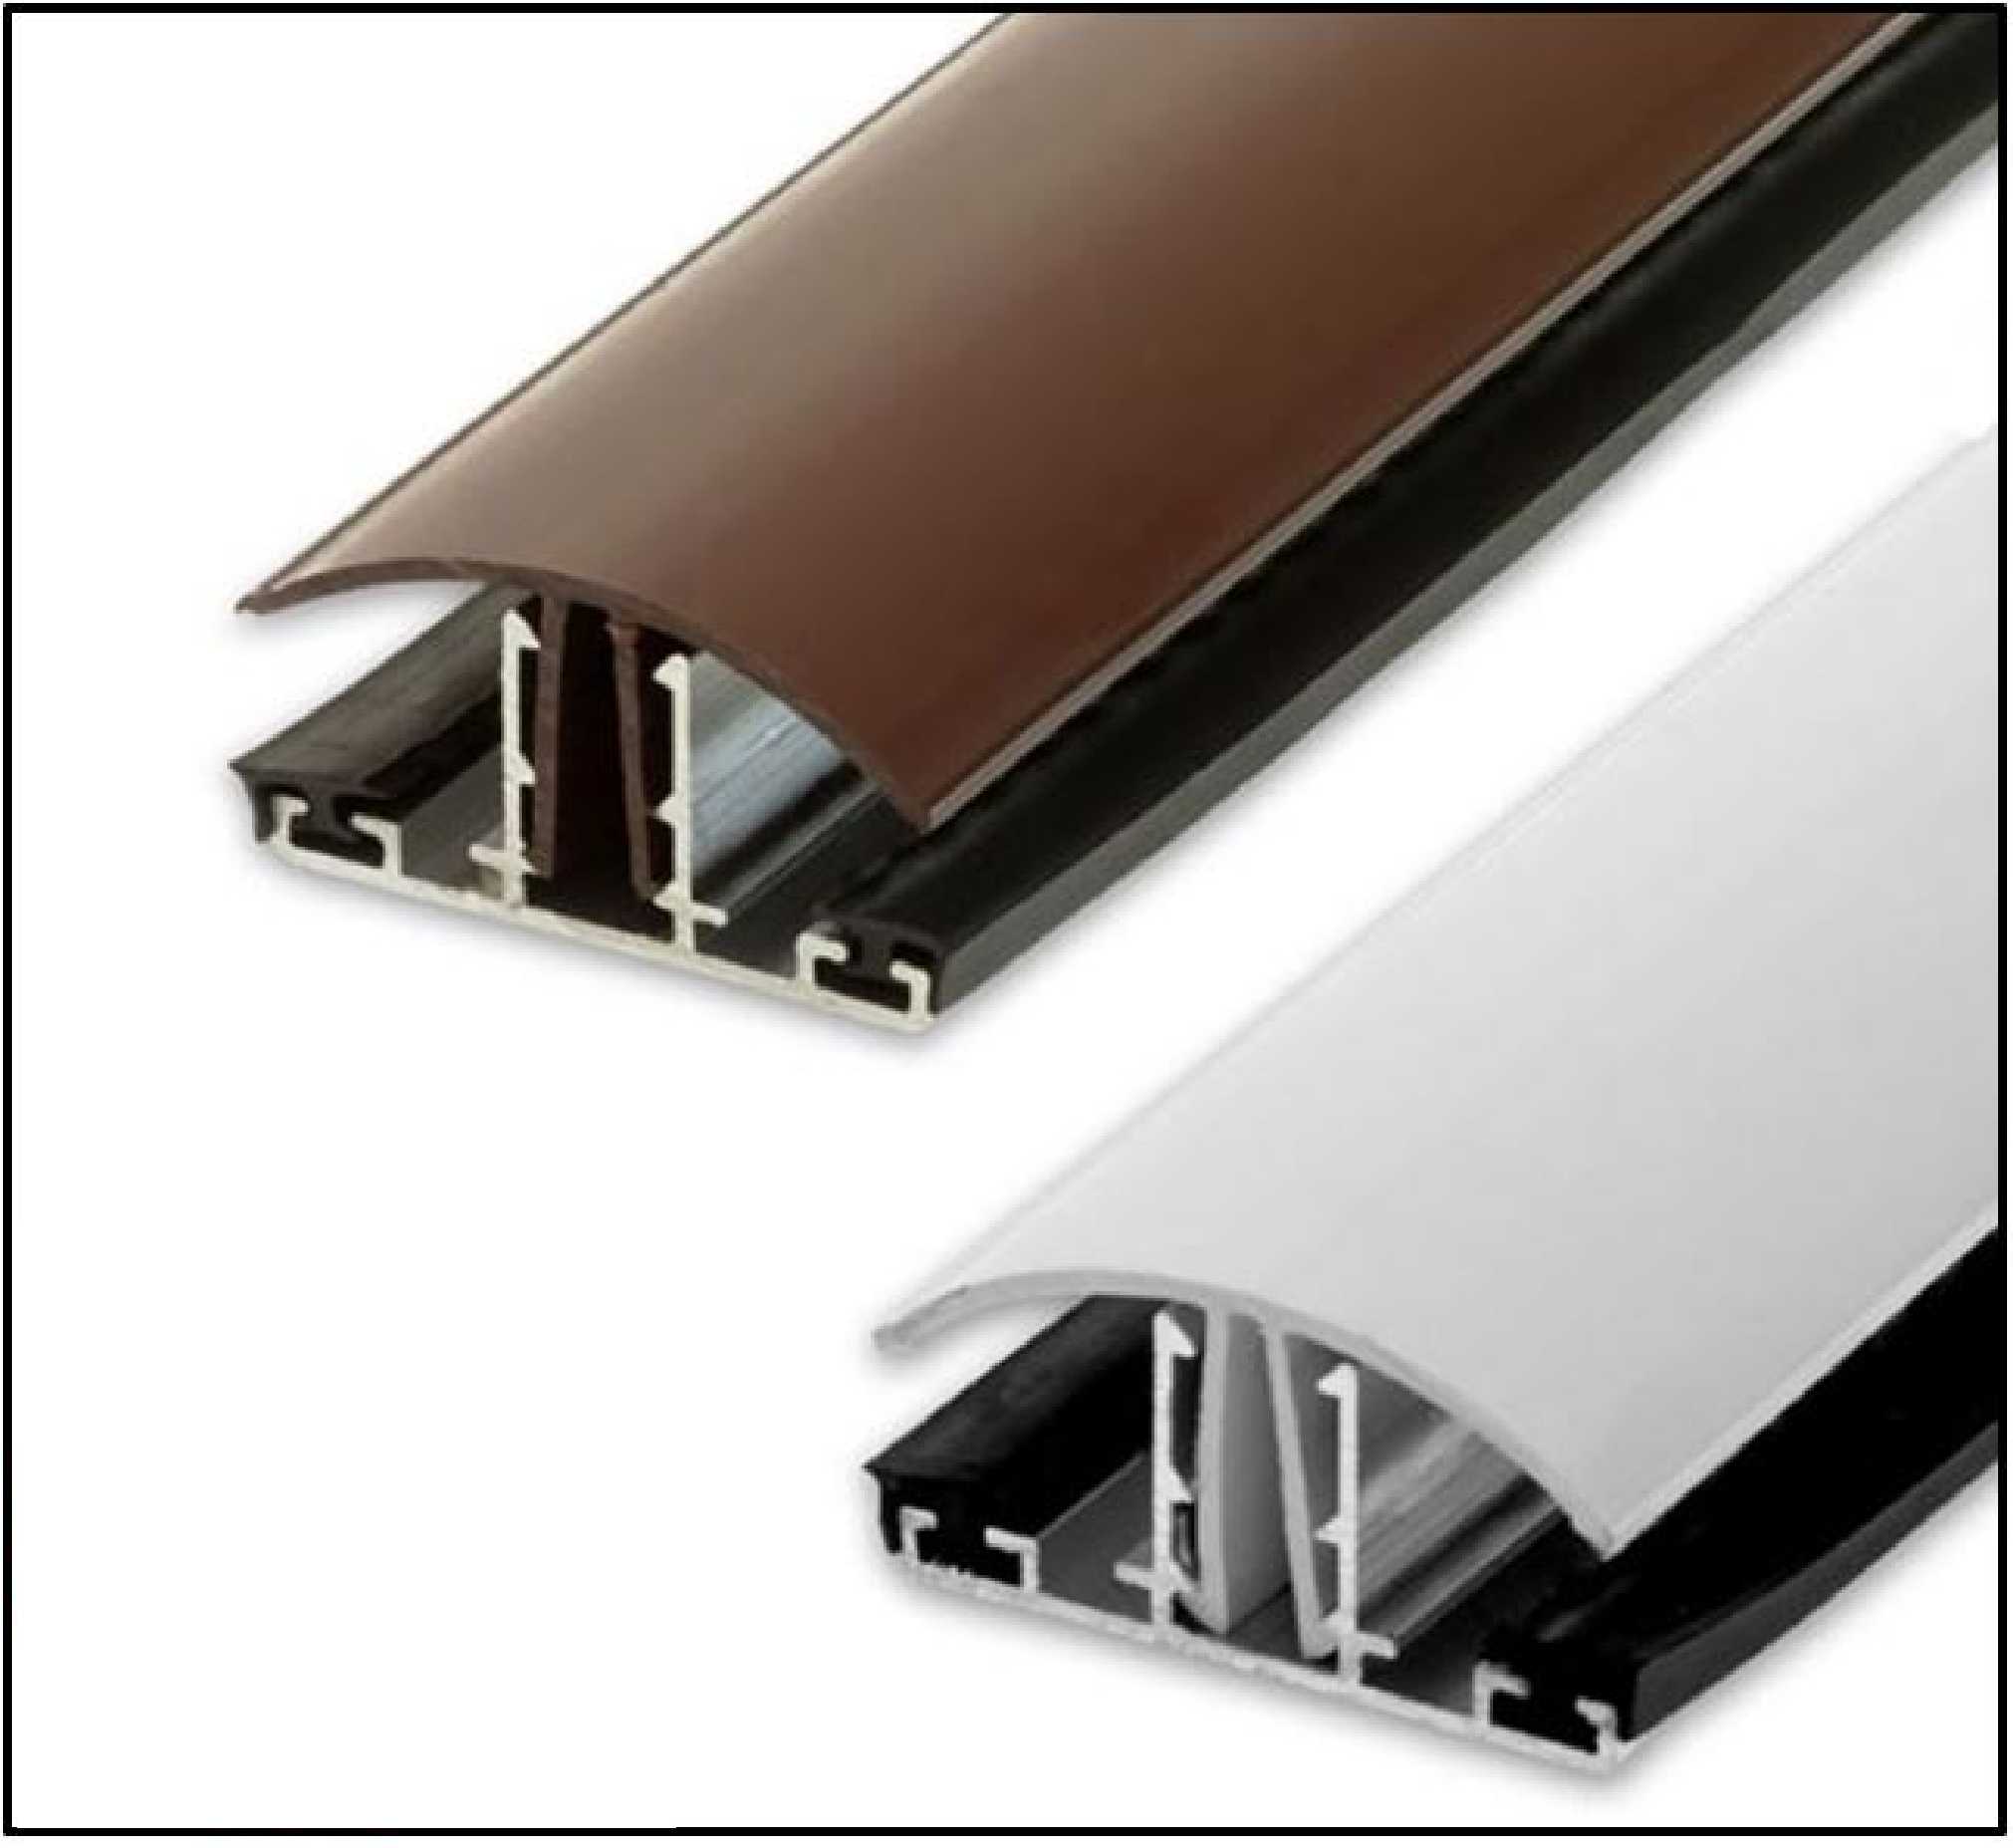 Snapfix uPVC Rafter Supported Glazing Bar for 25-35mm thick Polycarbonate Glazing, 2.5m - 4.0m